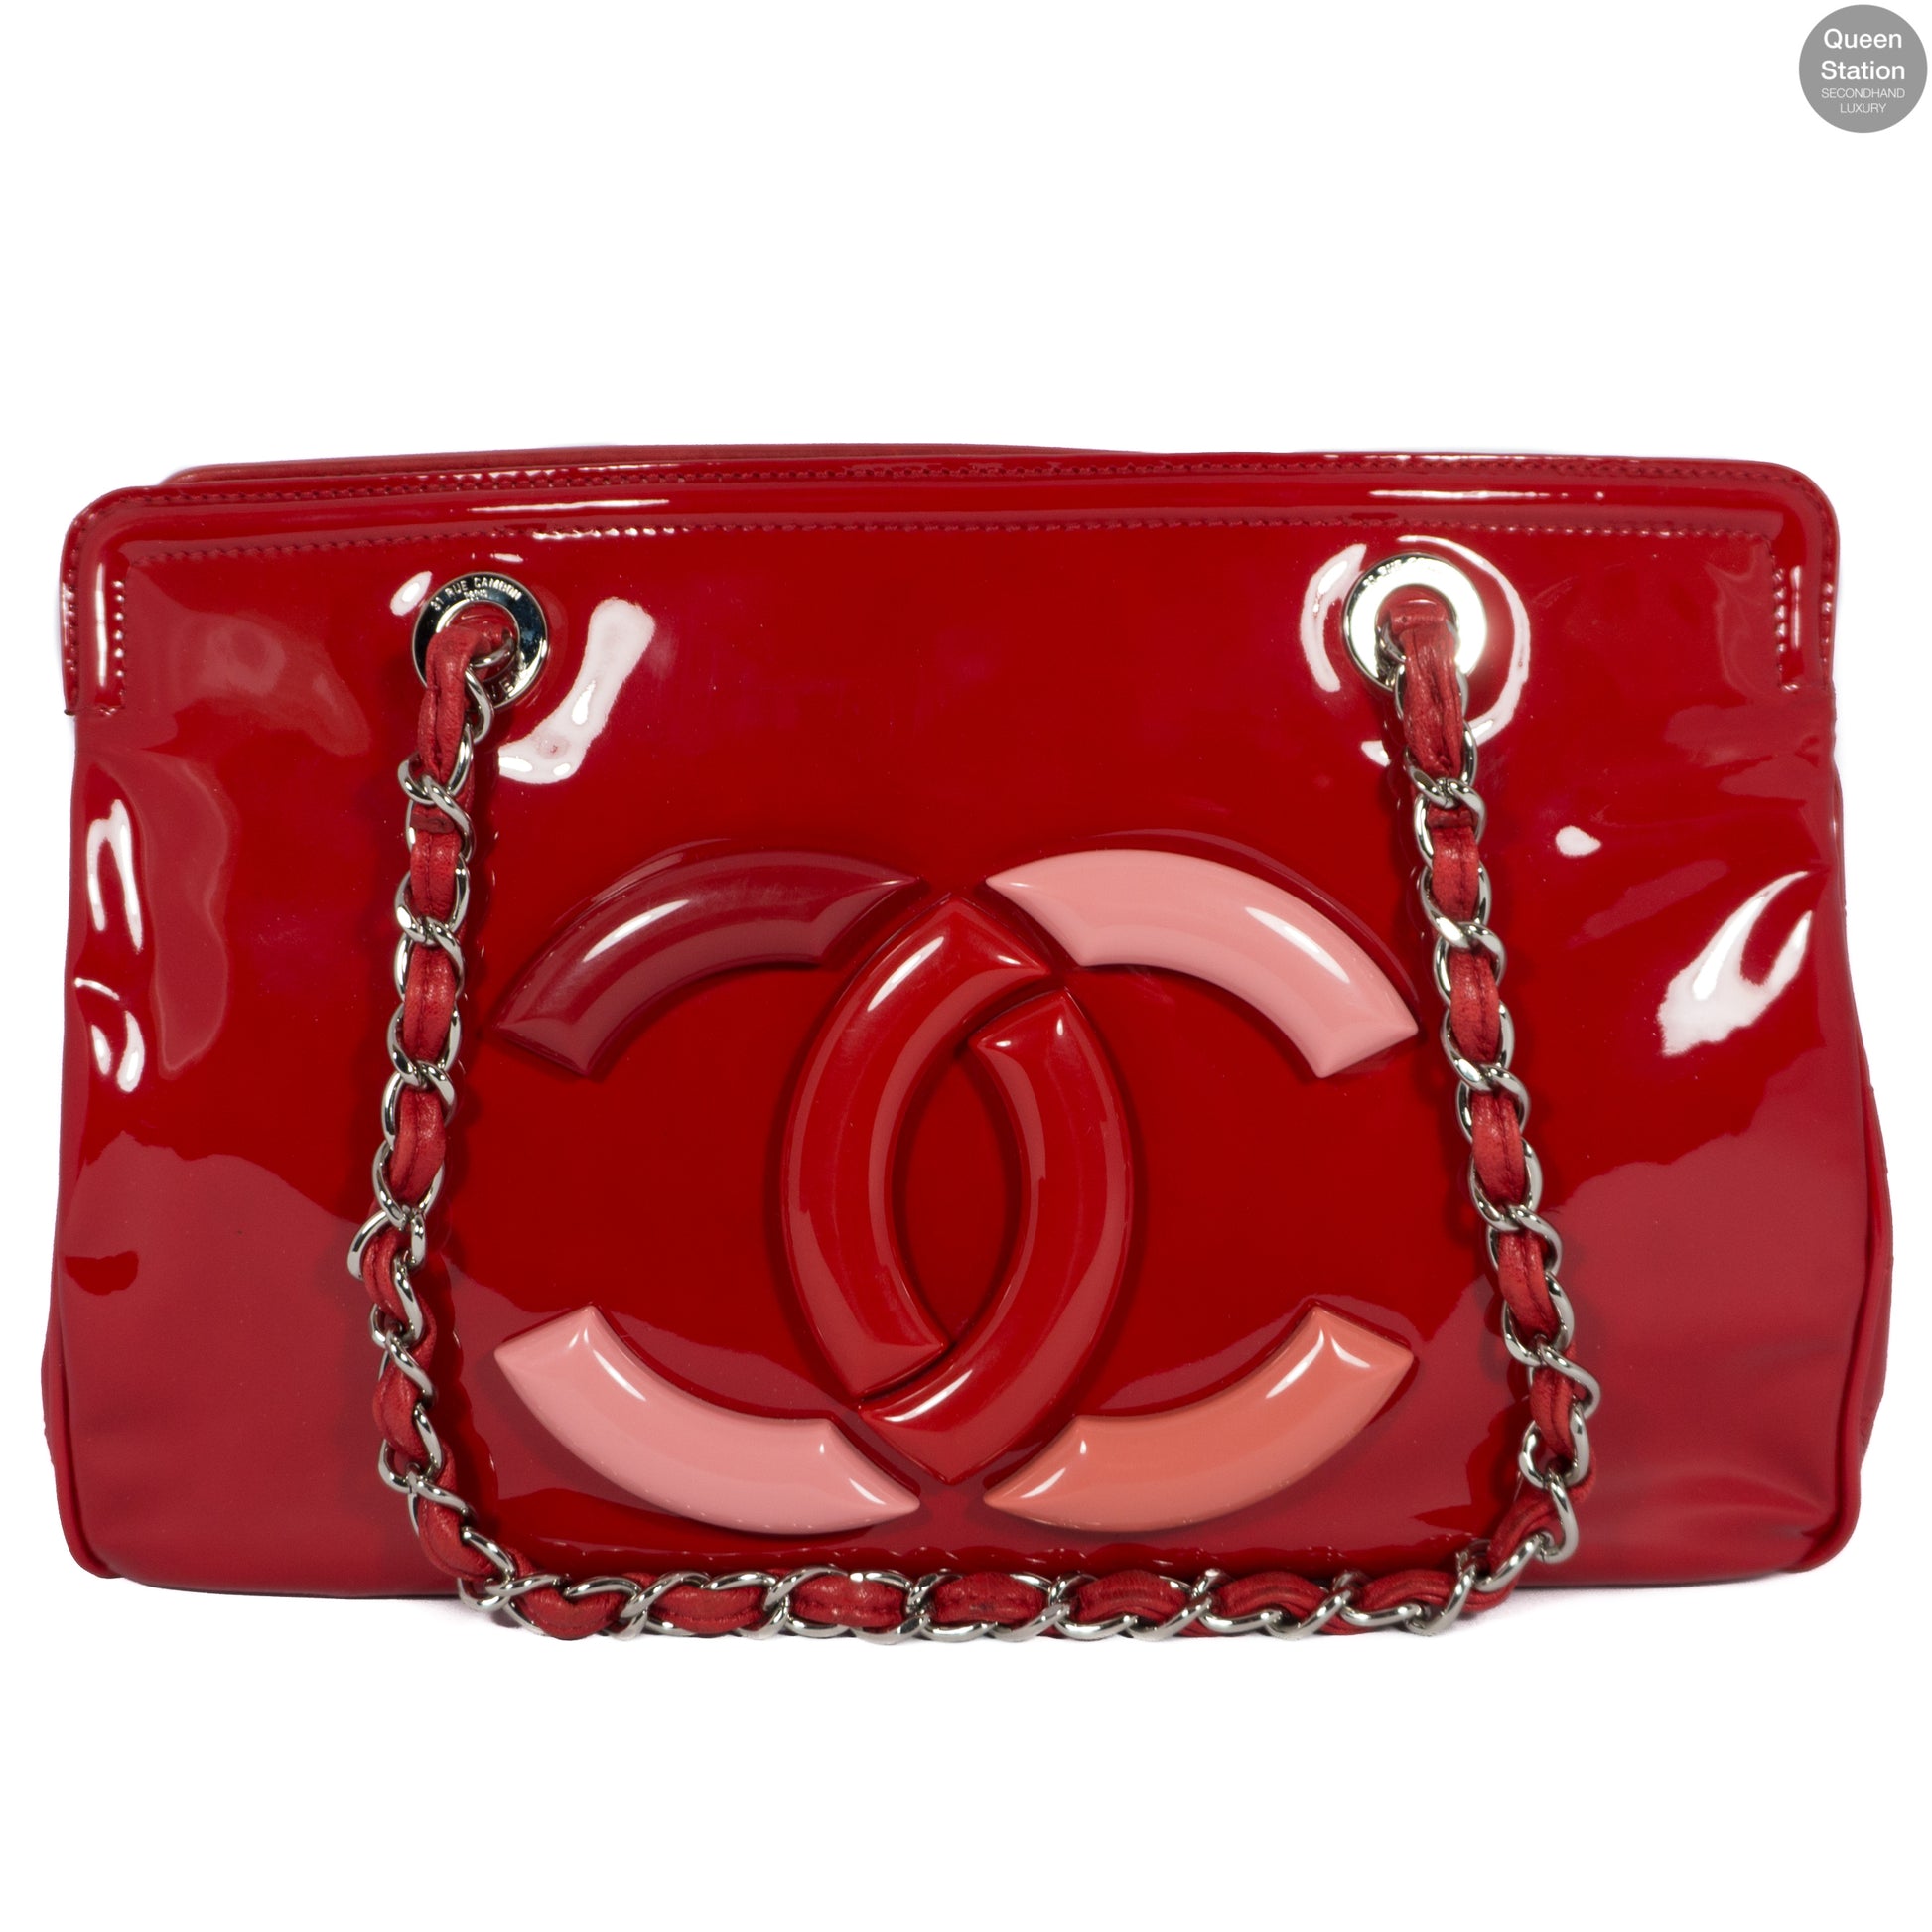 Chanel Lipstick Red Patent Leather